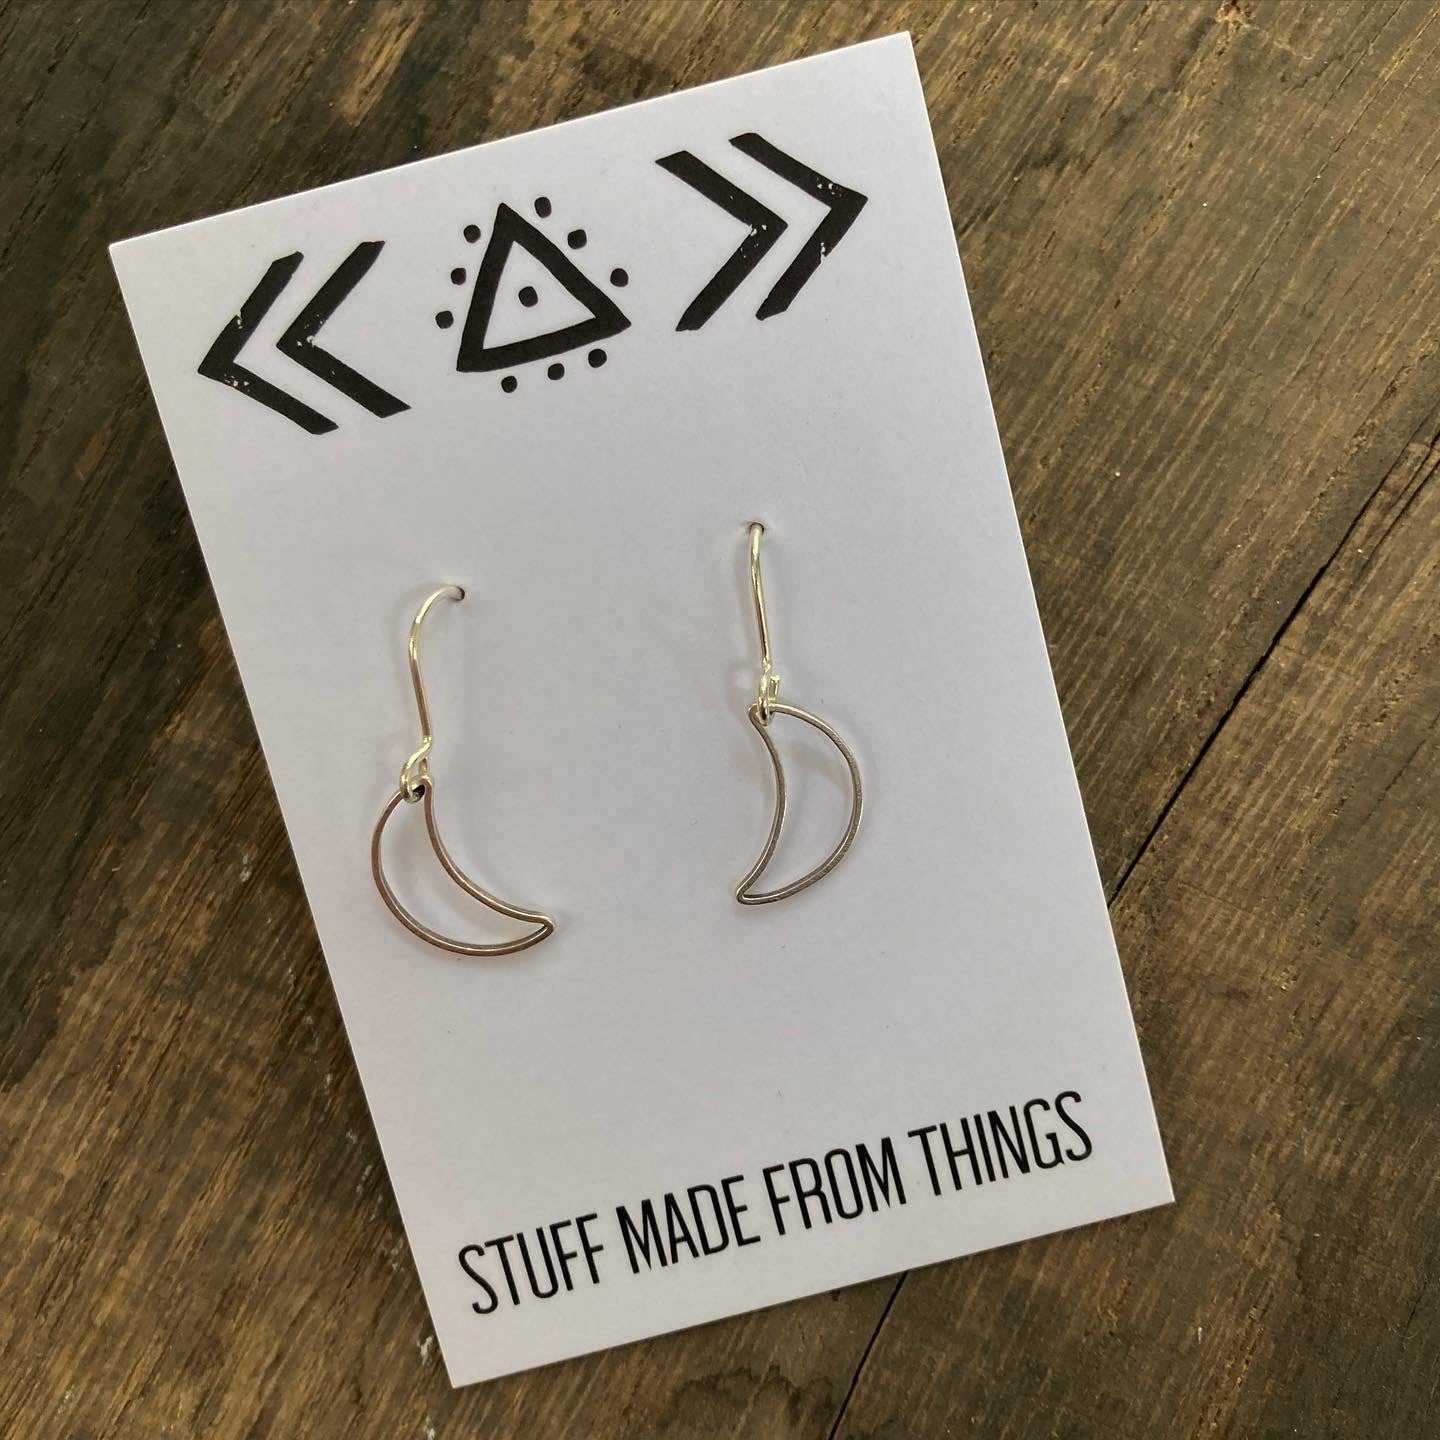 Tiny Silver Tone Crescent Moon Earrings